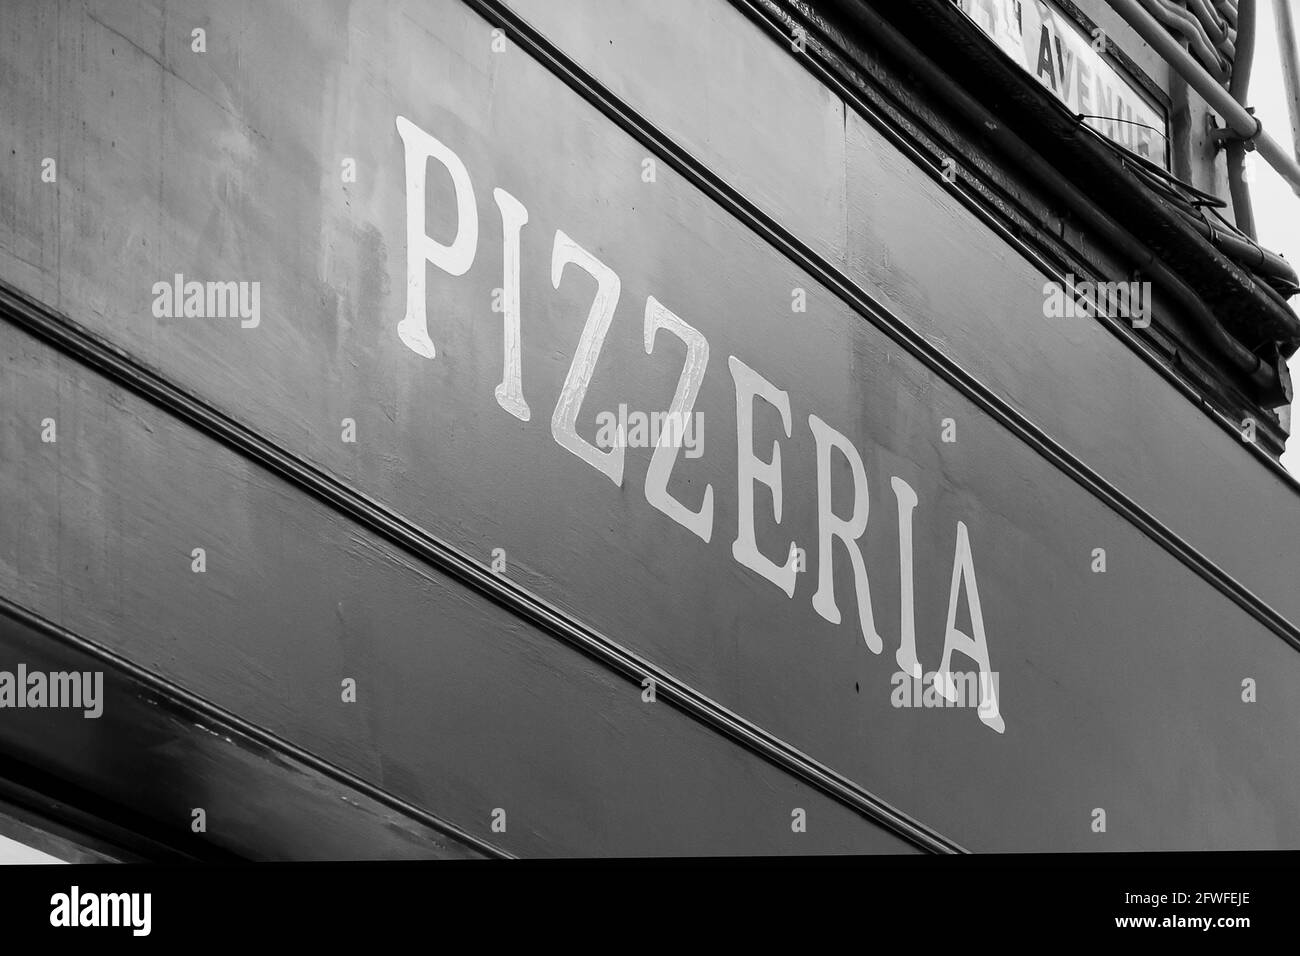 Pizzeria restaurant sign in black and white Stock Photo